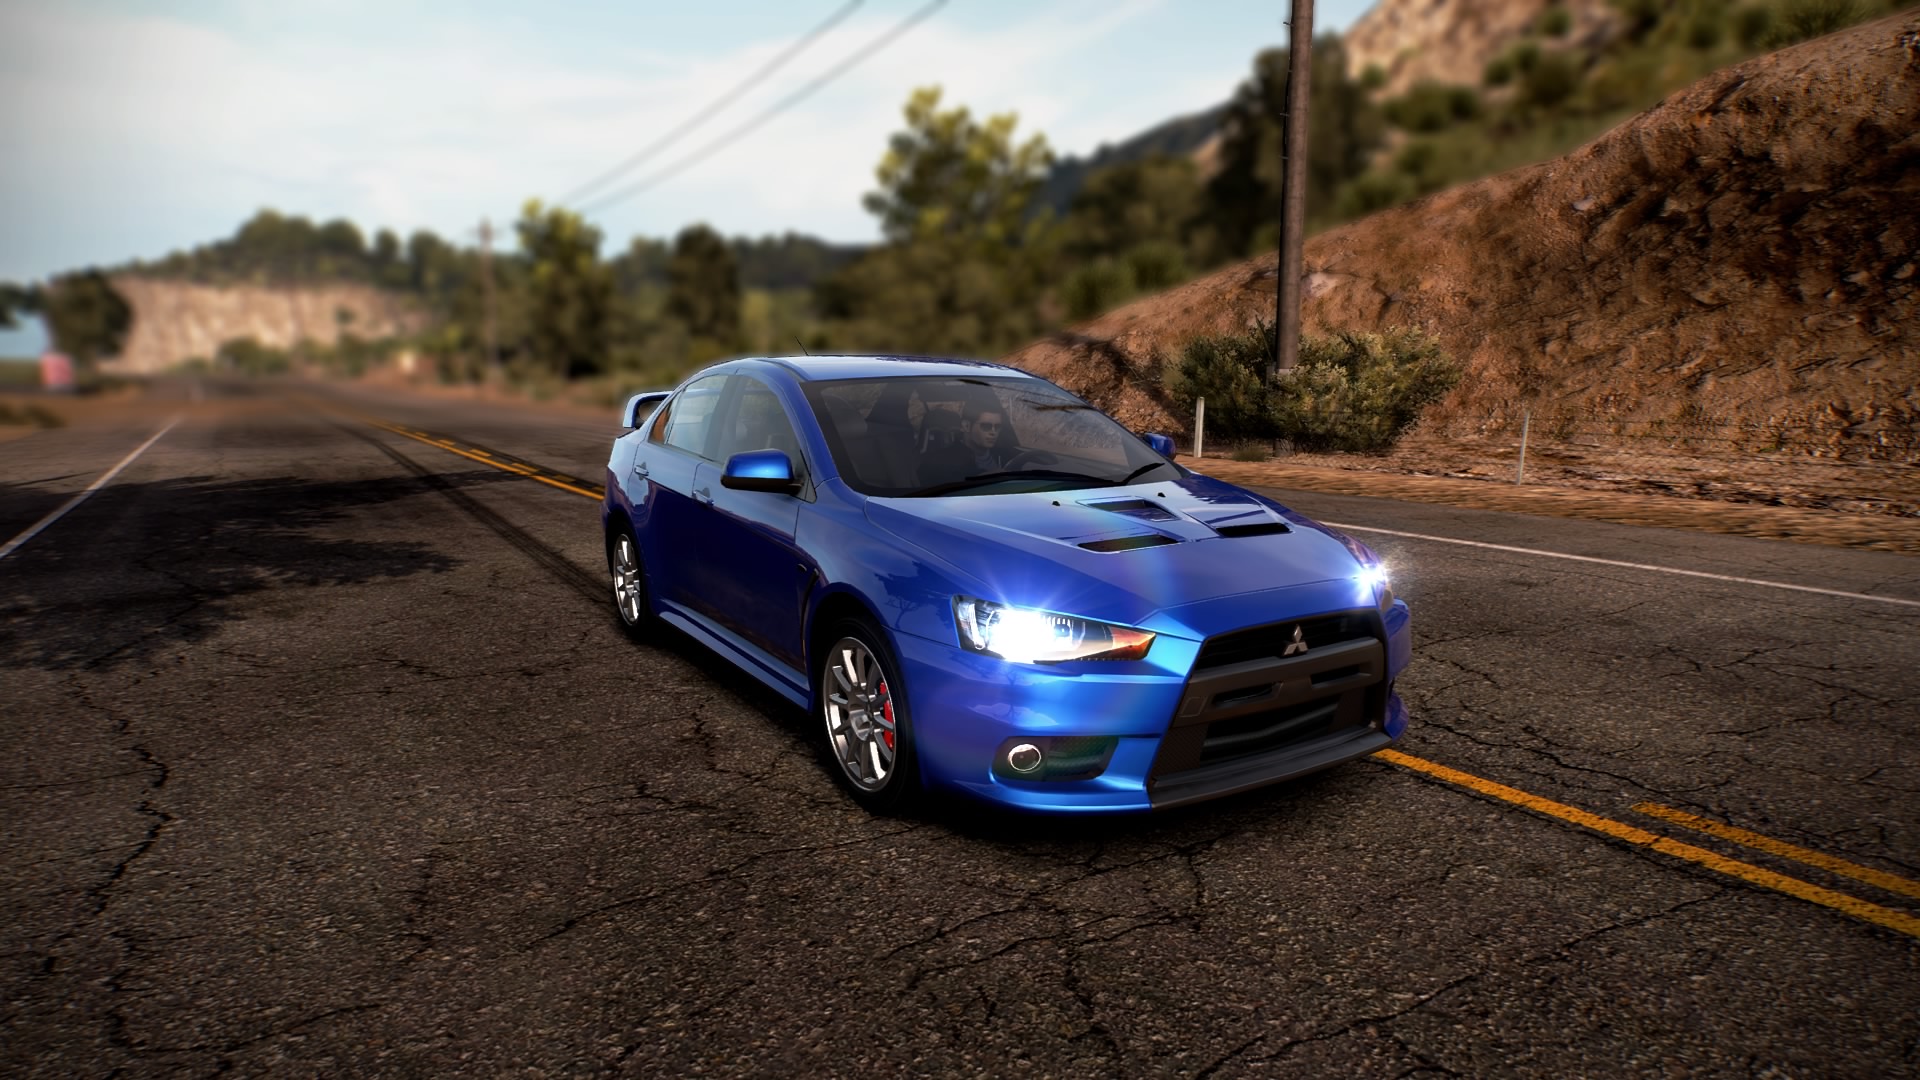 General 1920x1080 car Need for Speed: Hot Pursuit Mitsubishi Lancer Evo X depth of field Mitsubishi Japanese cars video games Electronic Arts